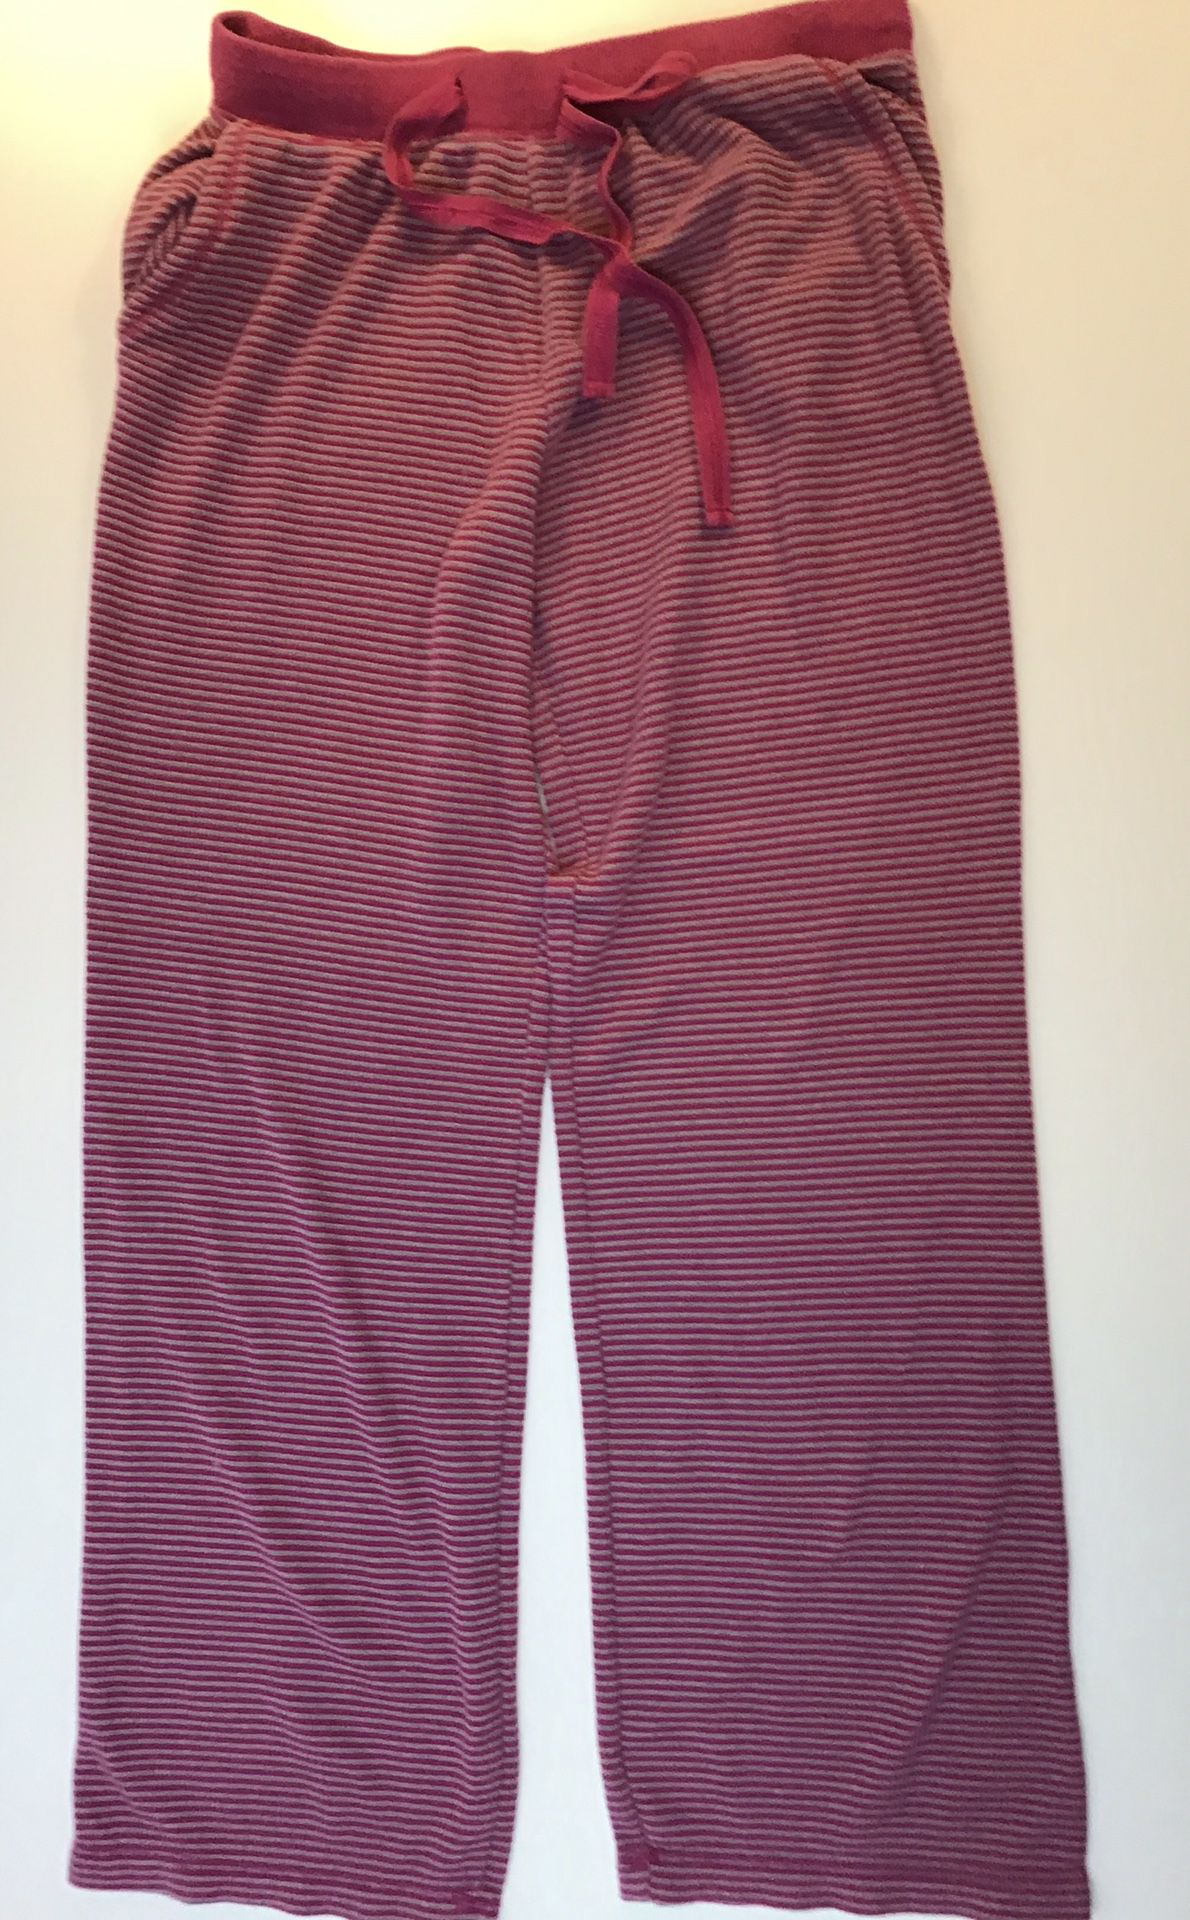 Women’s striped pajama bottoms grey & raspberry color with pockets size M